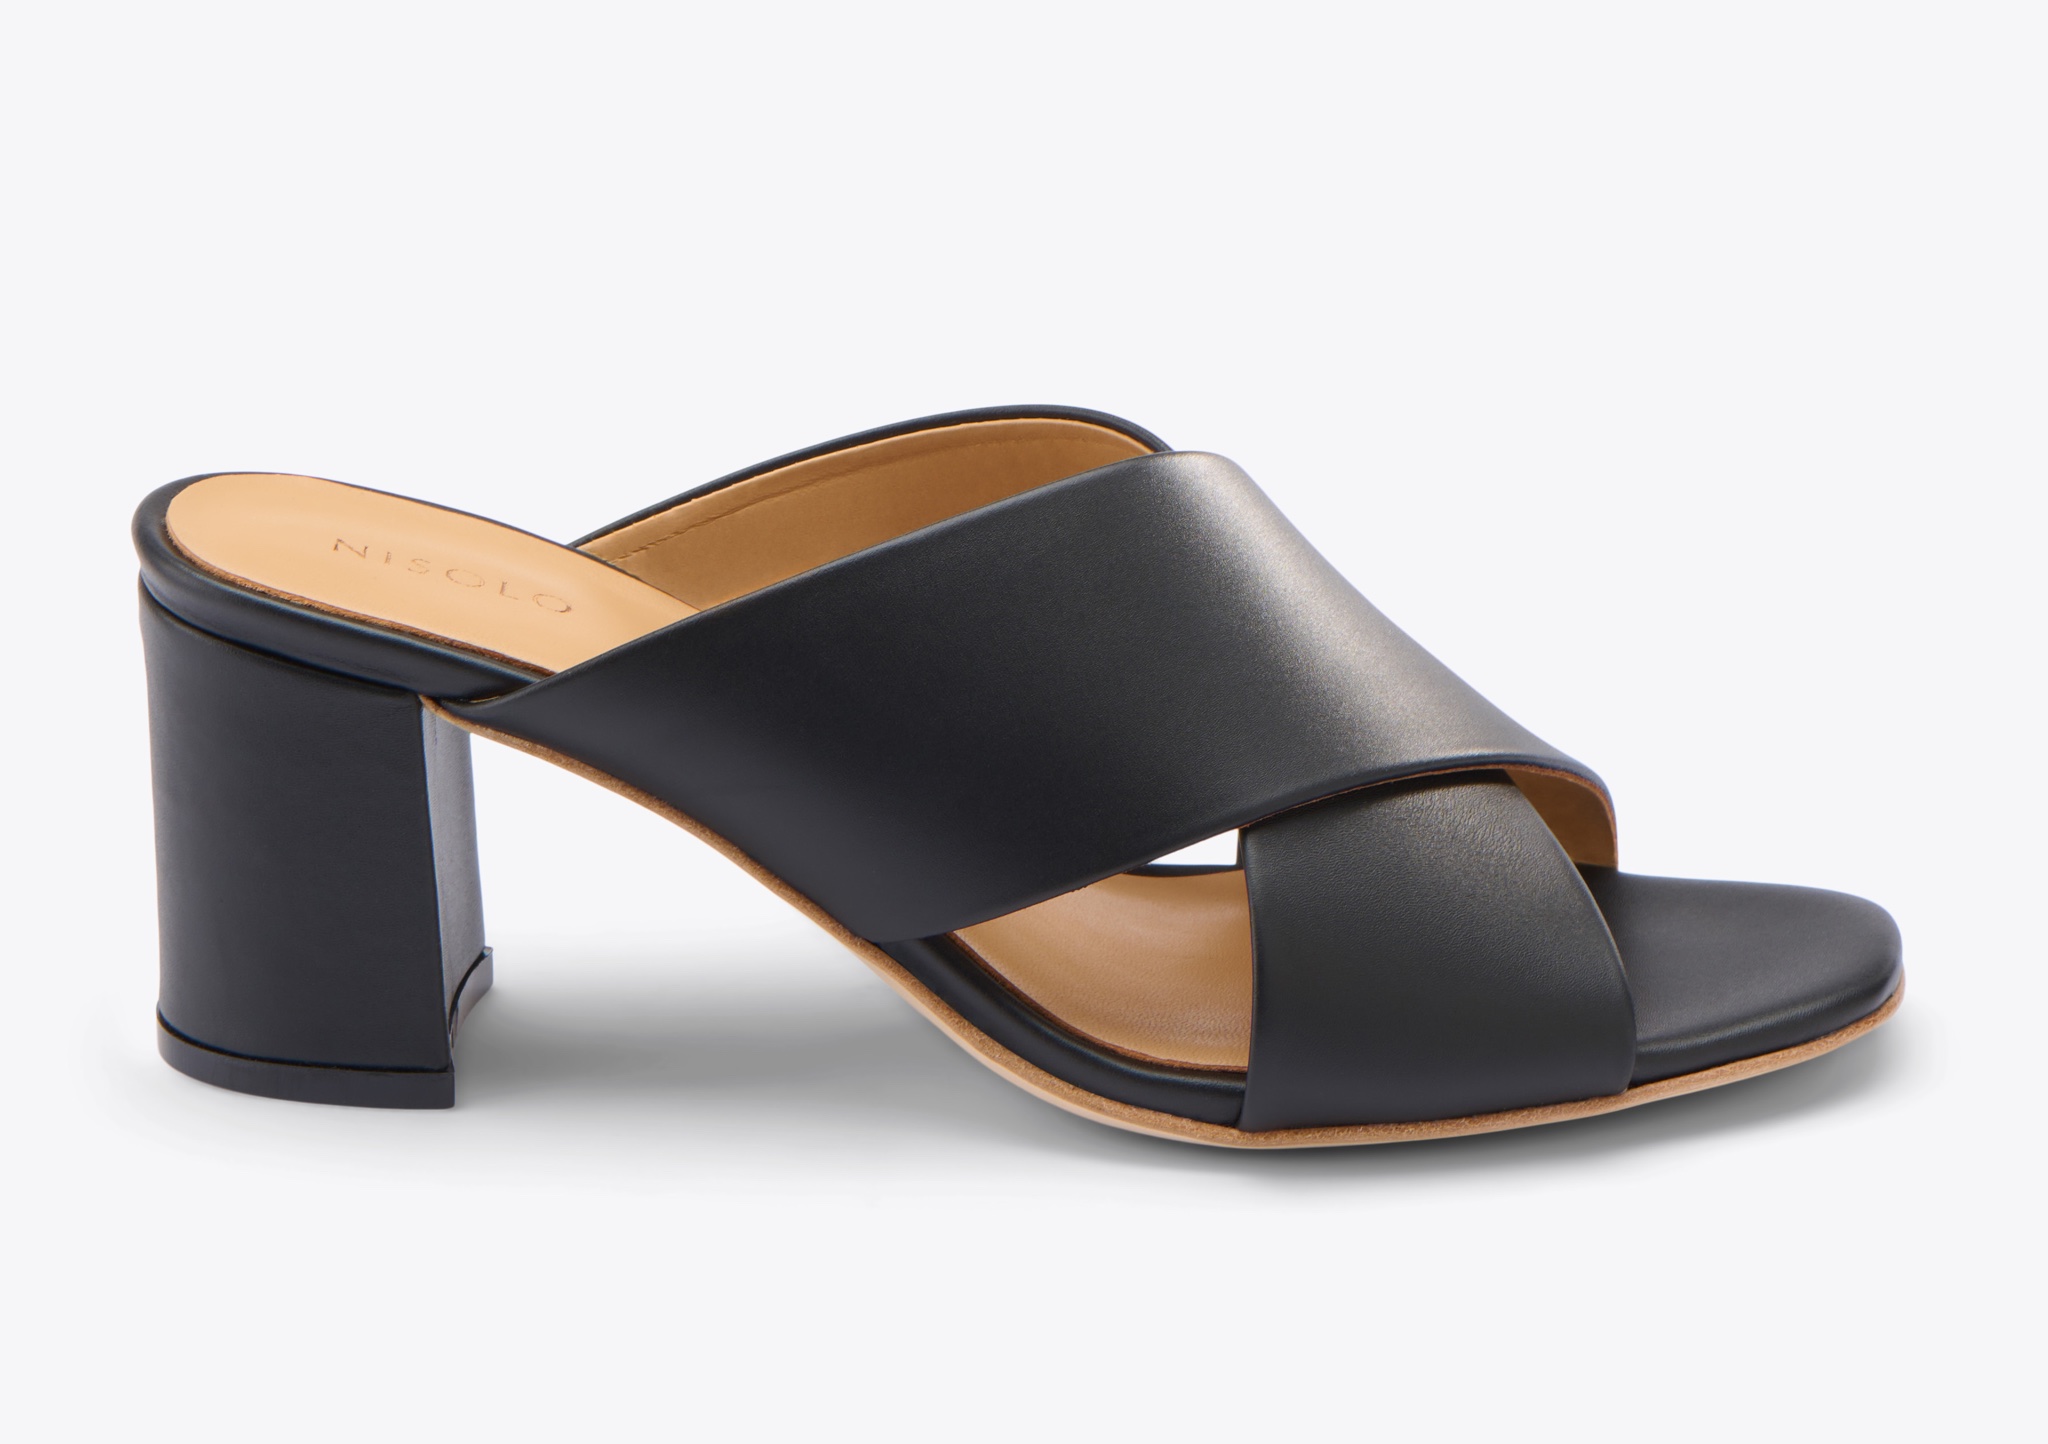 Nisolo Carina Cross Strap Mule Black - Every Nisolo product is built on the foundation of comfort, function, and design. 